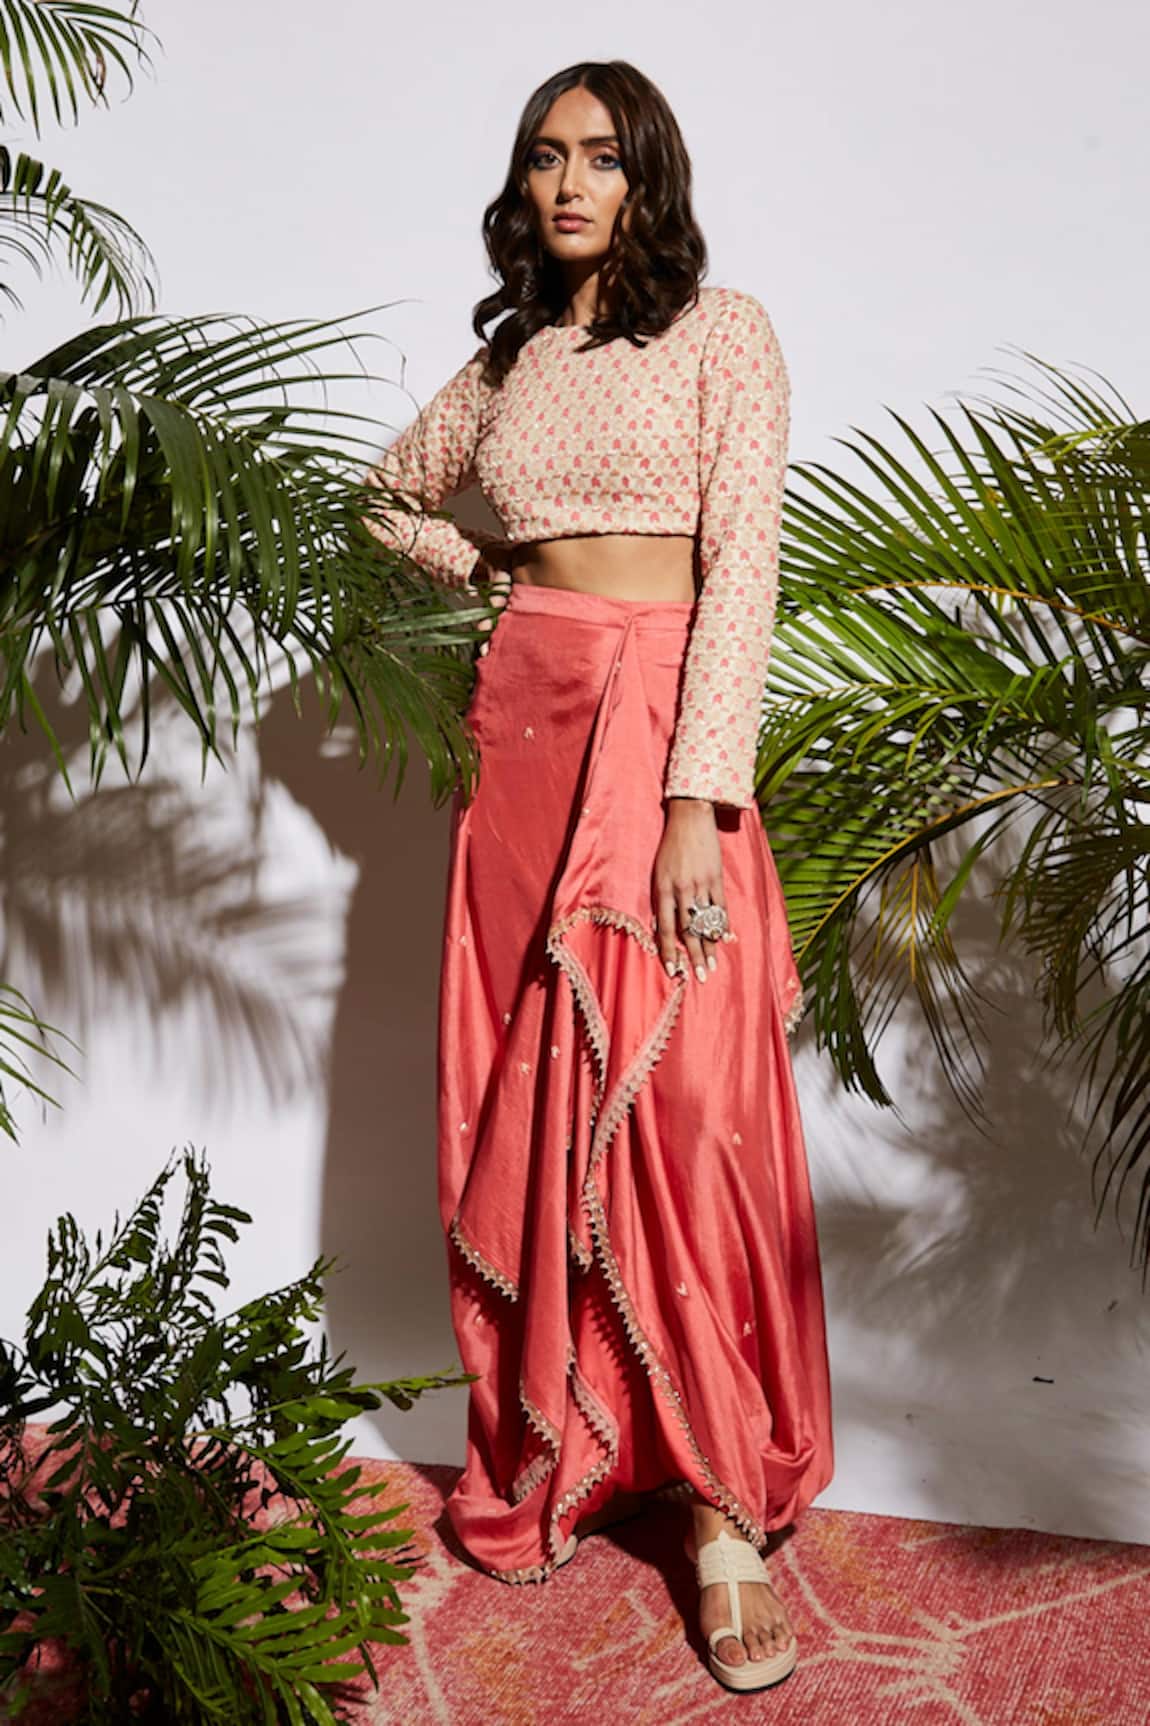 SVA by Sonam & Paras Modi Embroidered Crop Top With Draped Skirt